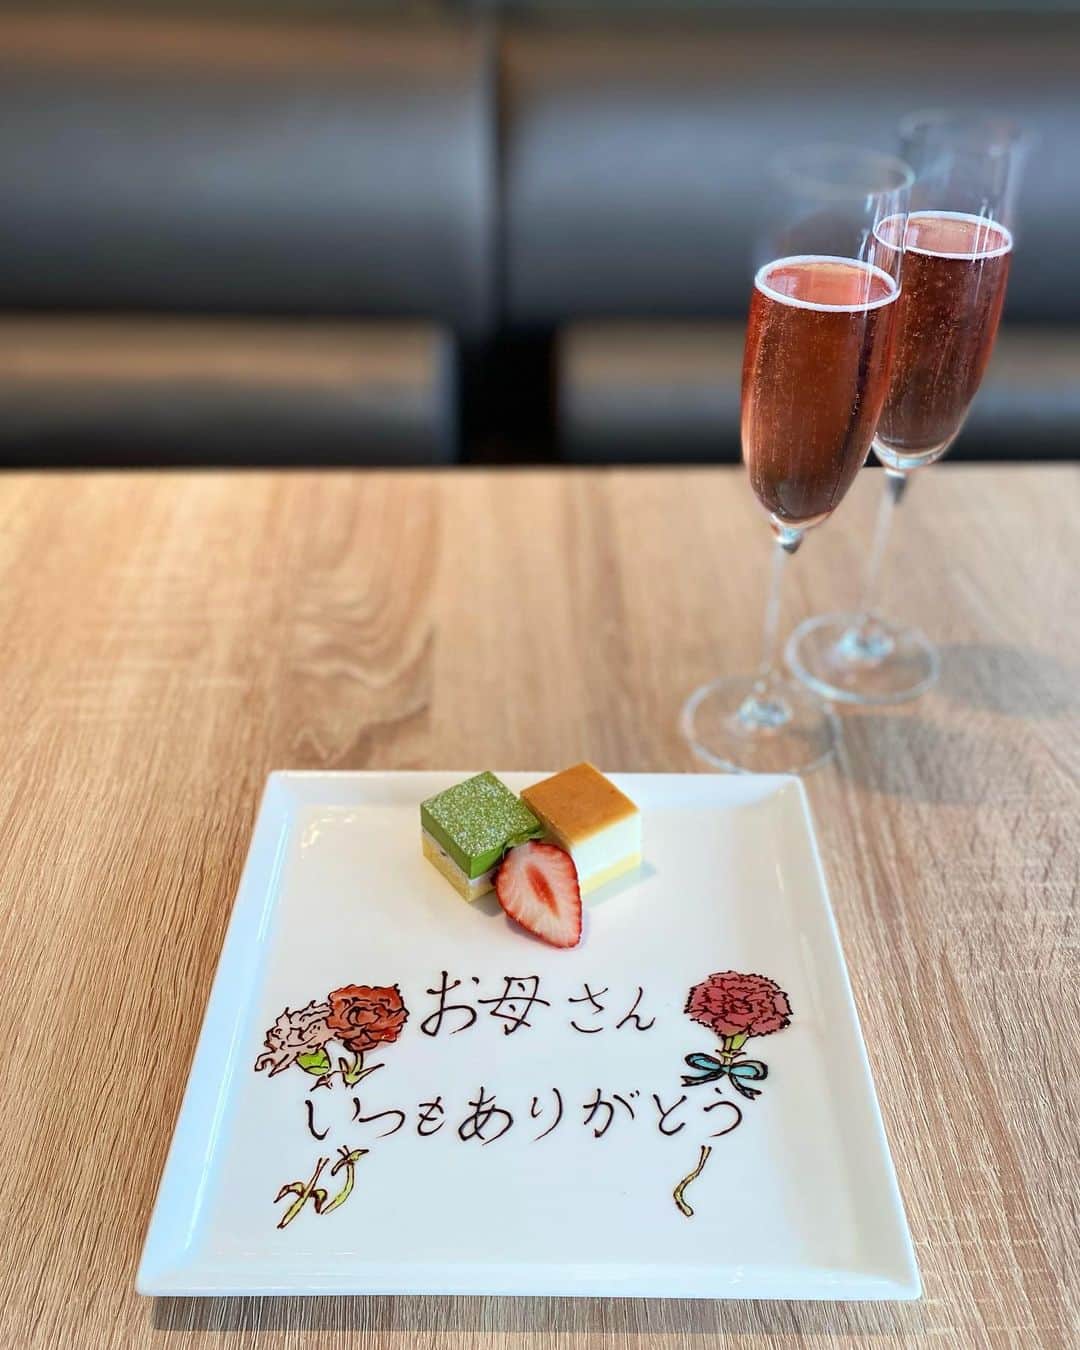 InterContinental Tokyo Bayさんのインスタグラム写真 - (InterContinental Tokyo BayInstagram)「. Make Mother’s Day memorable with the finest dining experience at Chef’s Live Kitchen, including a beautiful flower arrangement that perfect for celebration and a special dessert with message plate prepared by our chef.  Besides, we will bring your special memories to life with our high-quality photo print. Come and experience an unforgettable moment with your mother and thank her for supporting you in life.  シェフズ ライブ キッチンでは母の日に向けて大切なお母様へ感謝の気持ちを込めたフラワーギフトをお付けした「母の日プラン」を5月31日まで販売しております💐  普段伝えられない感謝の気持ちをメッセージプレートに添えてサプライズ。さらに写真のプレゼントも。  ぜひこの機会に感謝の気持ちを伝えてみませんか？  本日から台湾祭フェアがスタートしております🇹🇼  #intercontinentaltokyobay #インターコンチネンタル東京ベイ #chefslivekitchen  #シェフズライブキッチン #ホテルビュッフェ　#ビュッフェ　  #ディナービュッフェ　#台湾グルメ  #台湾祭 #taiwan #台湾フェア  #台湾美食 #台湾 #台湾料理  #竹芝　#浜松町　 #メッセージプレート　#母の日 #母の日プレゼント  #お母さんいつもありがとう　#mothersday  #スパークリングワイン  #rosesparkling　  #フラワーギフト　#Flowergift #母の日ギフト  #intercontinental高雄洲際酒店  #meetfresh鮮芋仙 #エバー航空  #台湾観光局」4月27日 1時11分 - intercontitokyobay